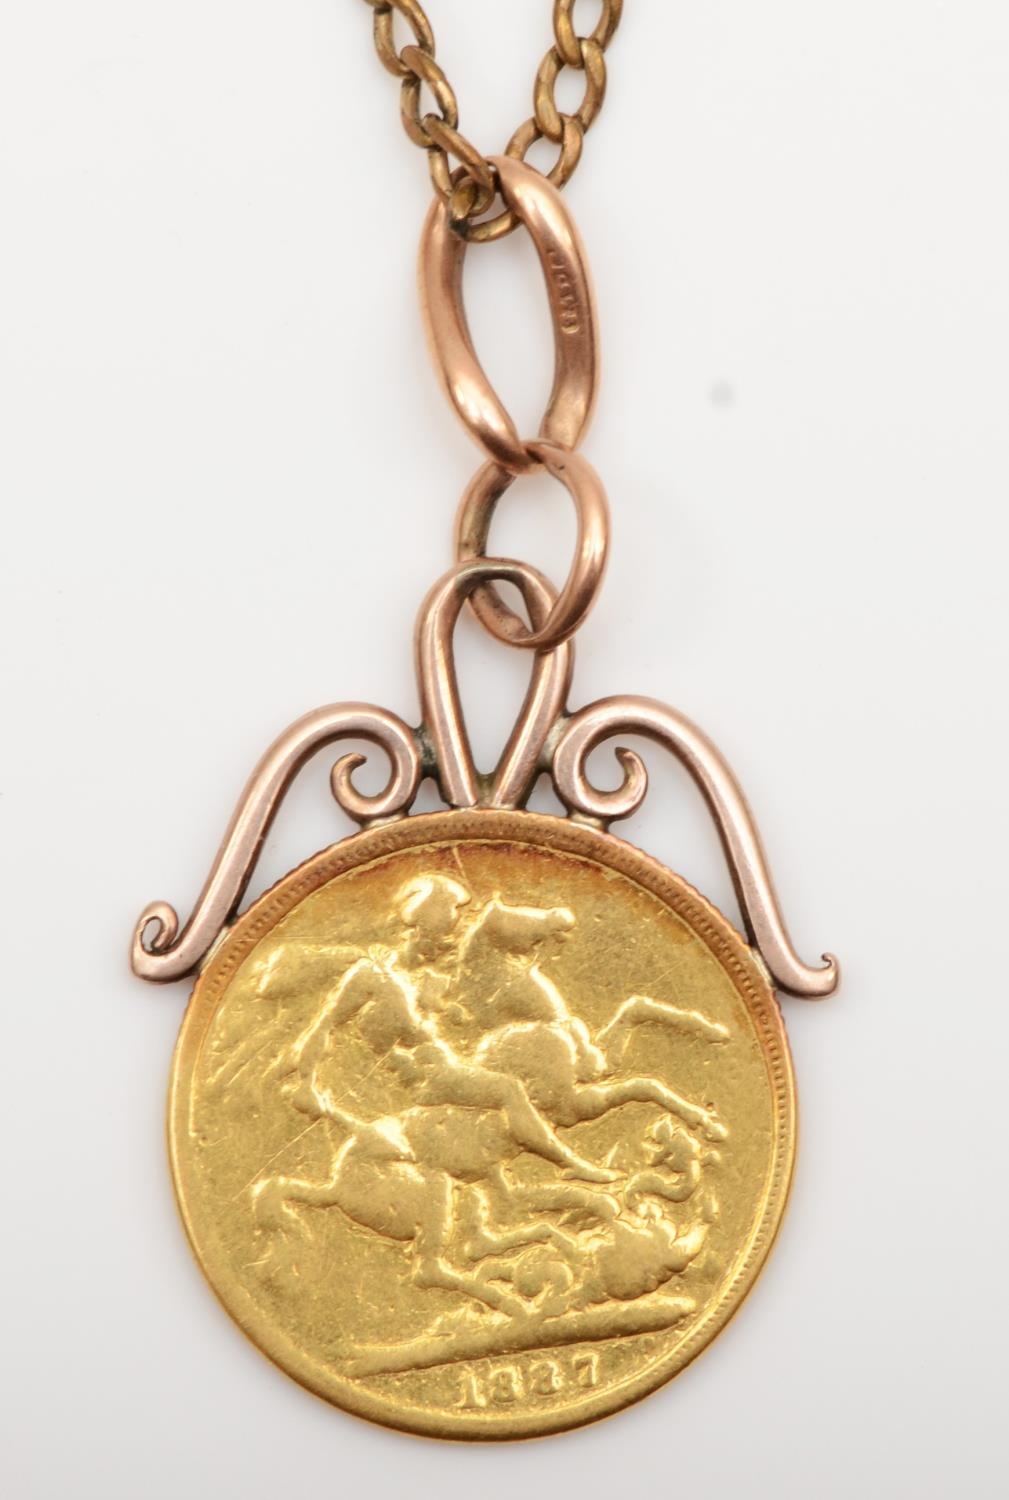 A Victorian Old Head 1887 sovereign, hard soldered as a pendant, metal chain, pendant 9.2gm - Image 2 of 3